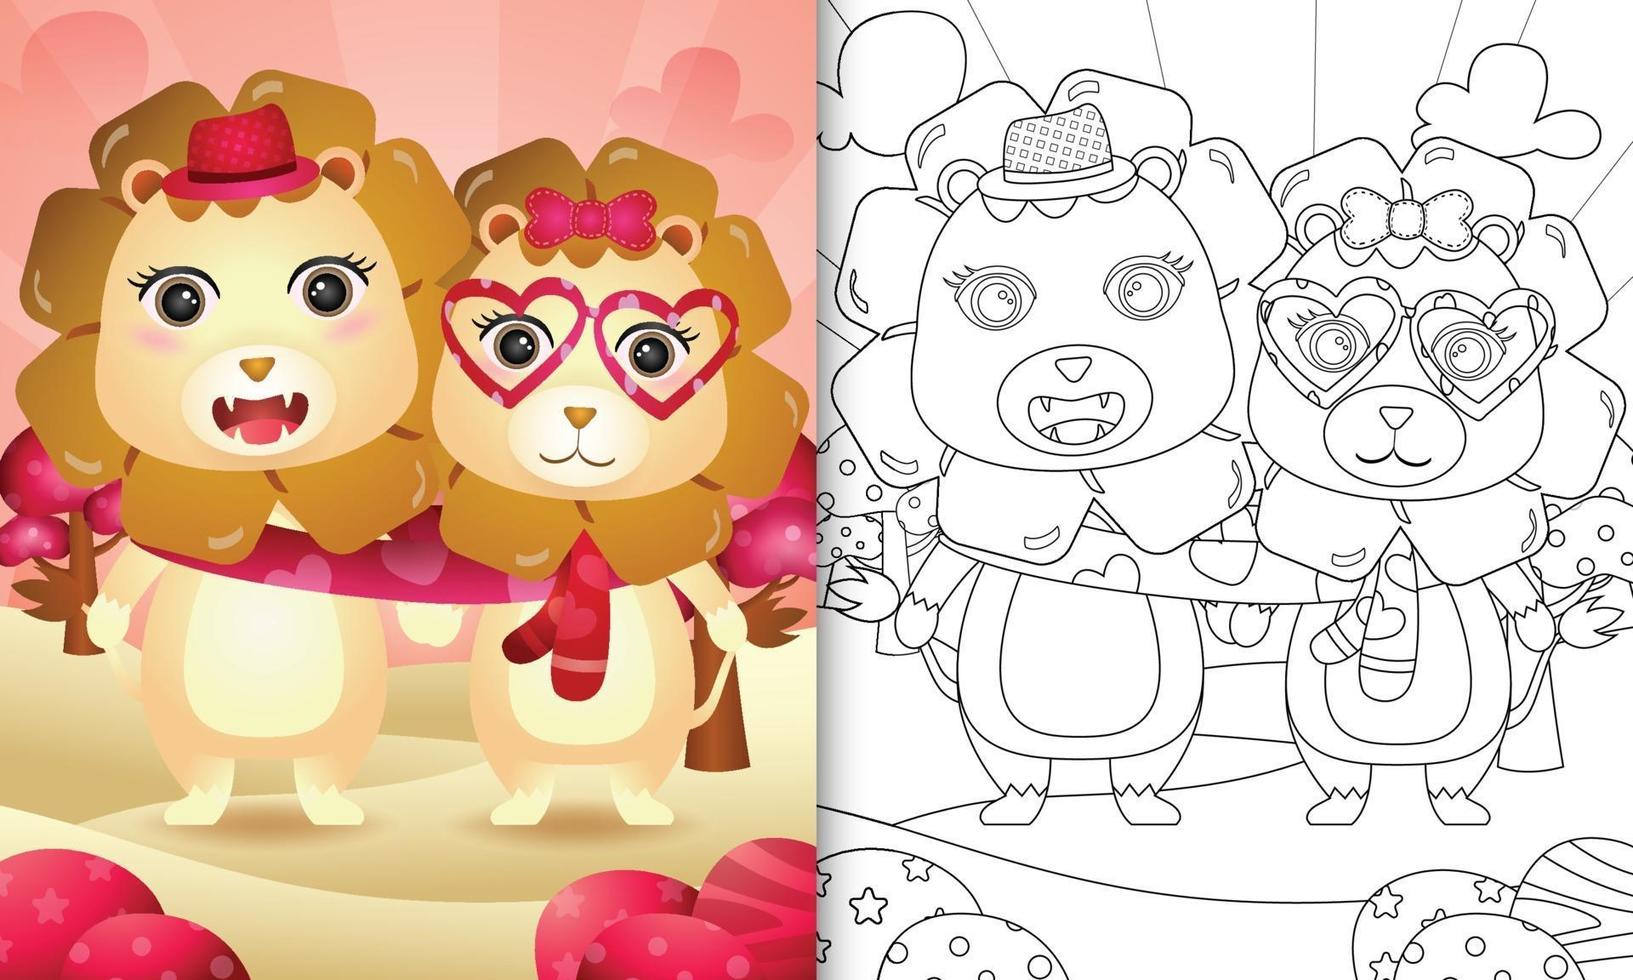 coloring book for kids with Cute valentine's day lion couple illustrated vector